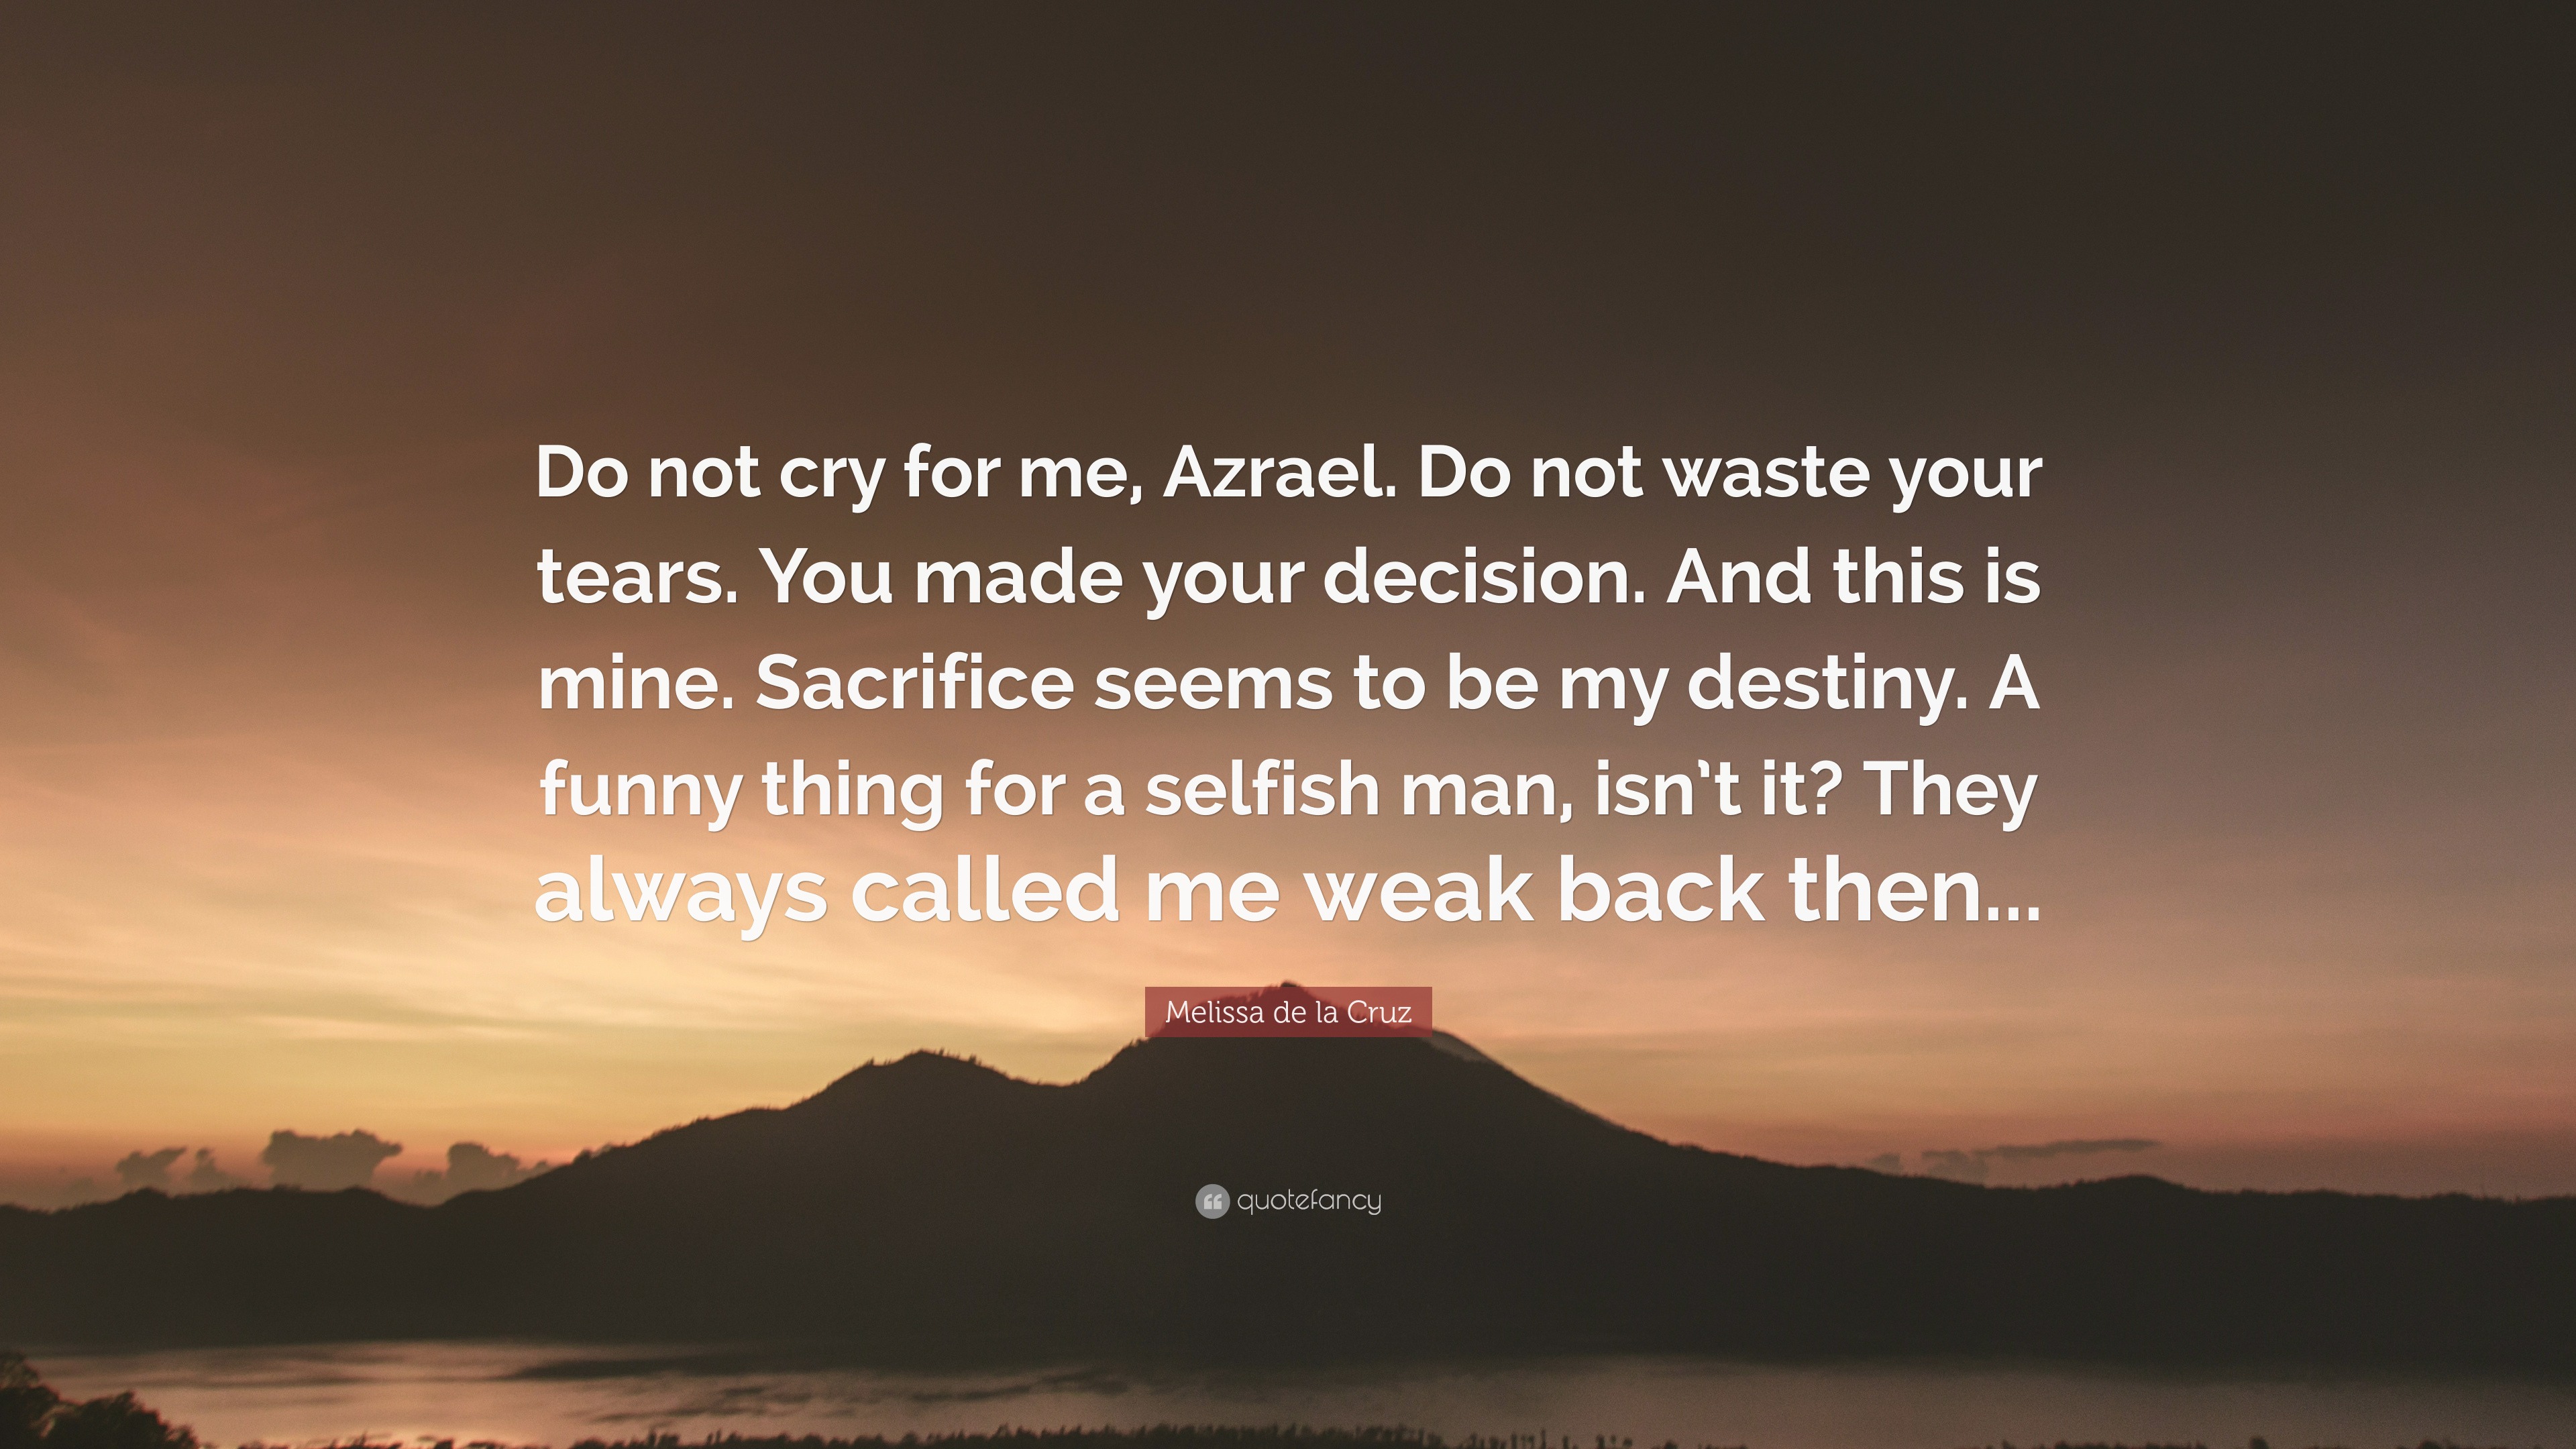 Melissa de la Cruz Quote: “Do not cry for me, Azrael. Do not waste your  tears. You made your decision. And this is mine. Sacrifice seems to be my  d...”